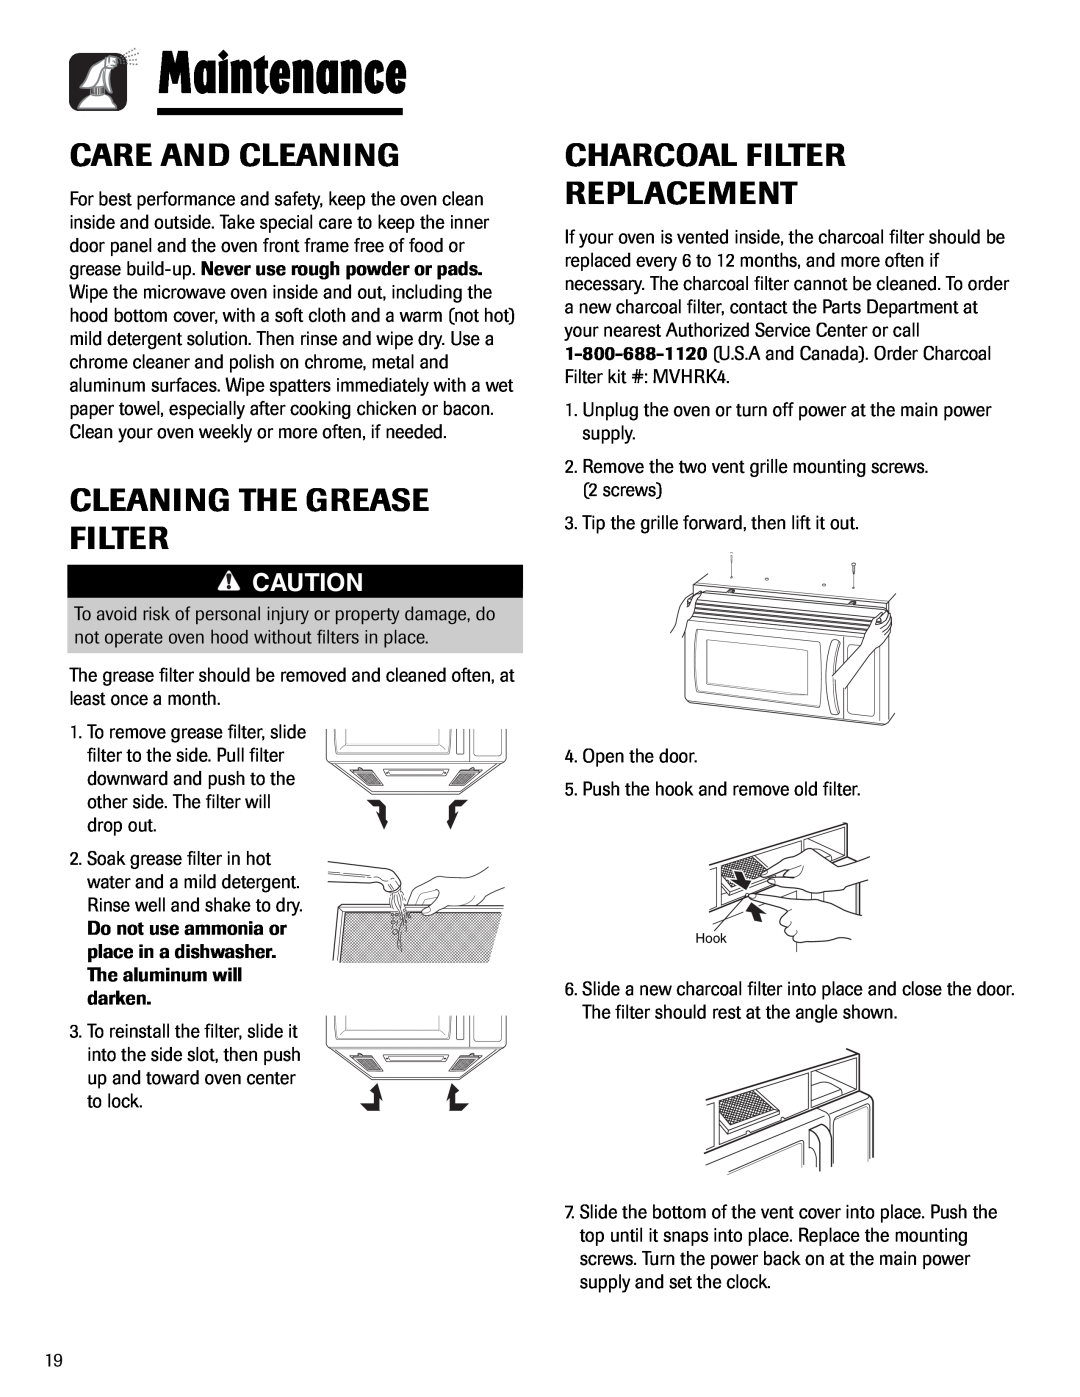 Maytag UMV1152BA Maintenance, Care And Cleaning, Cleaning The Grease Filter, Charcoal Filter Replacement 